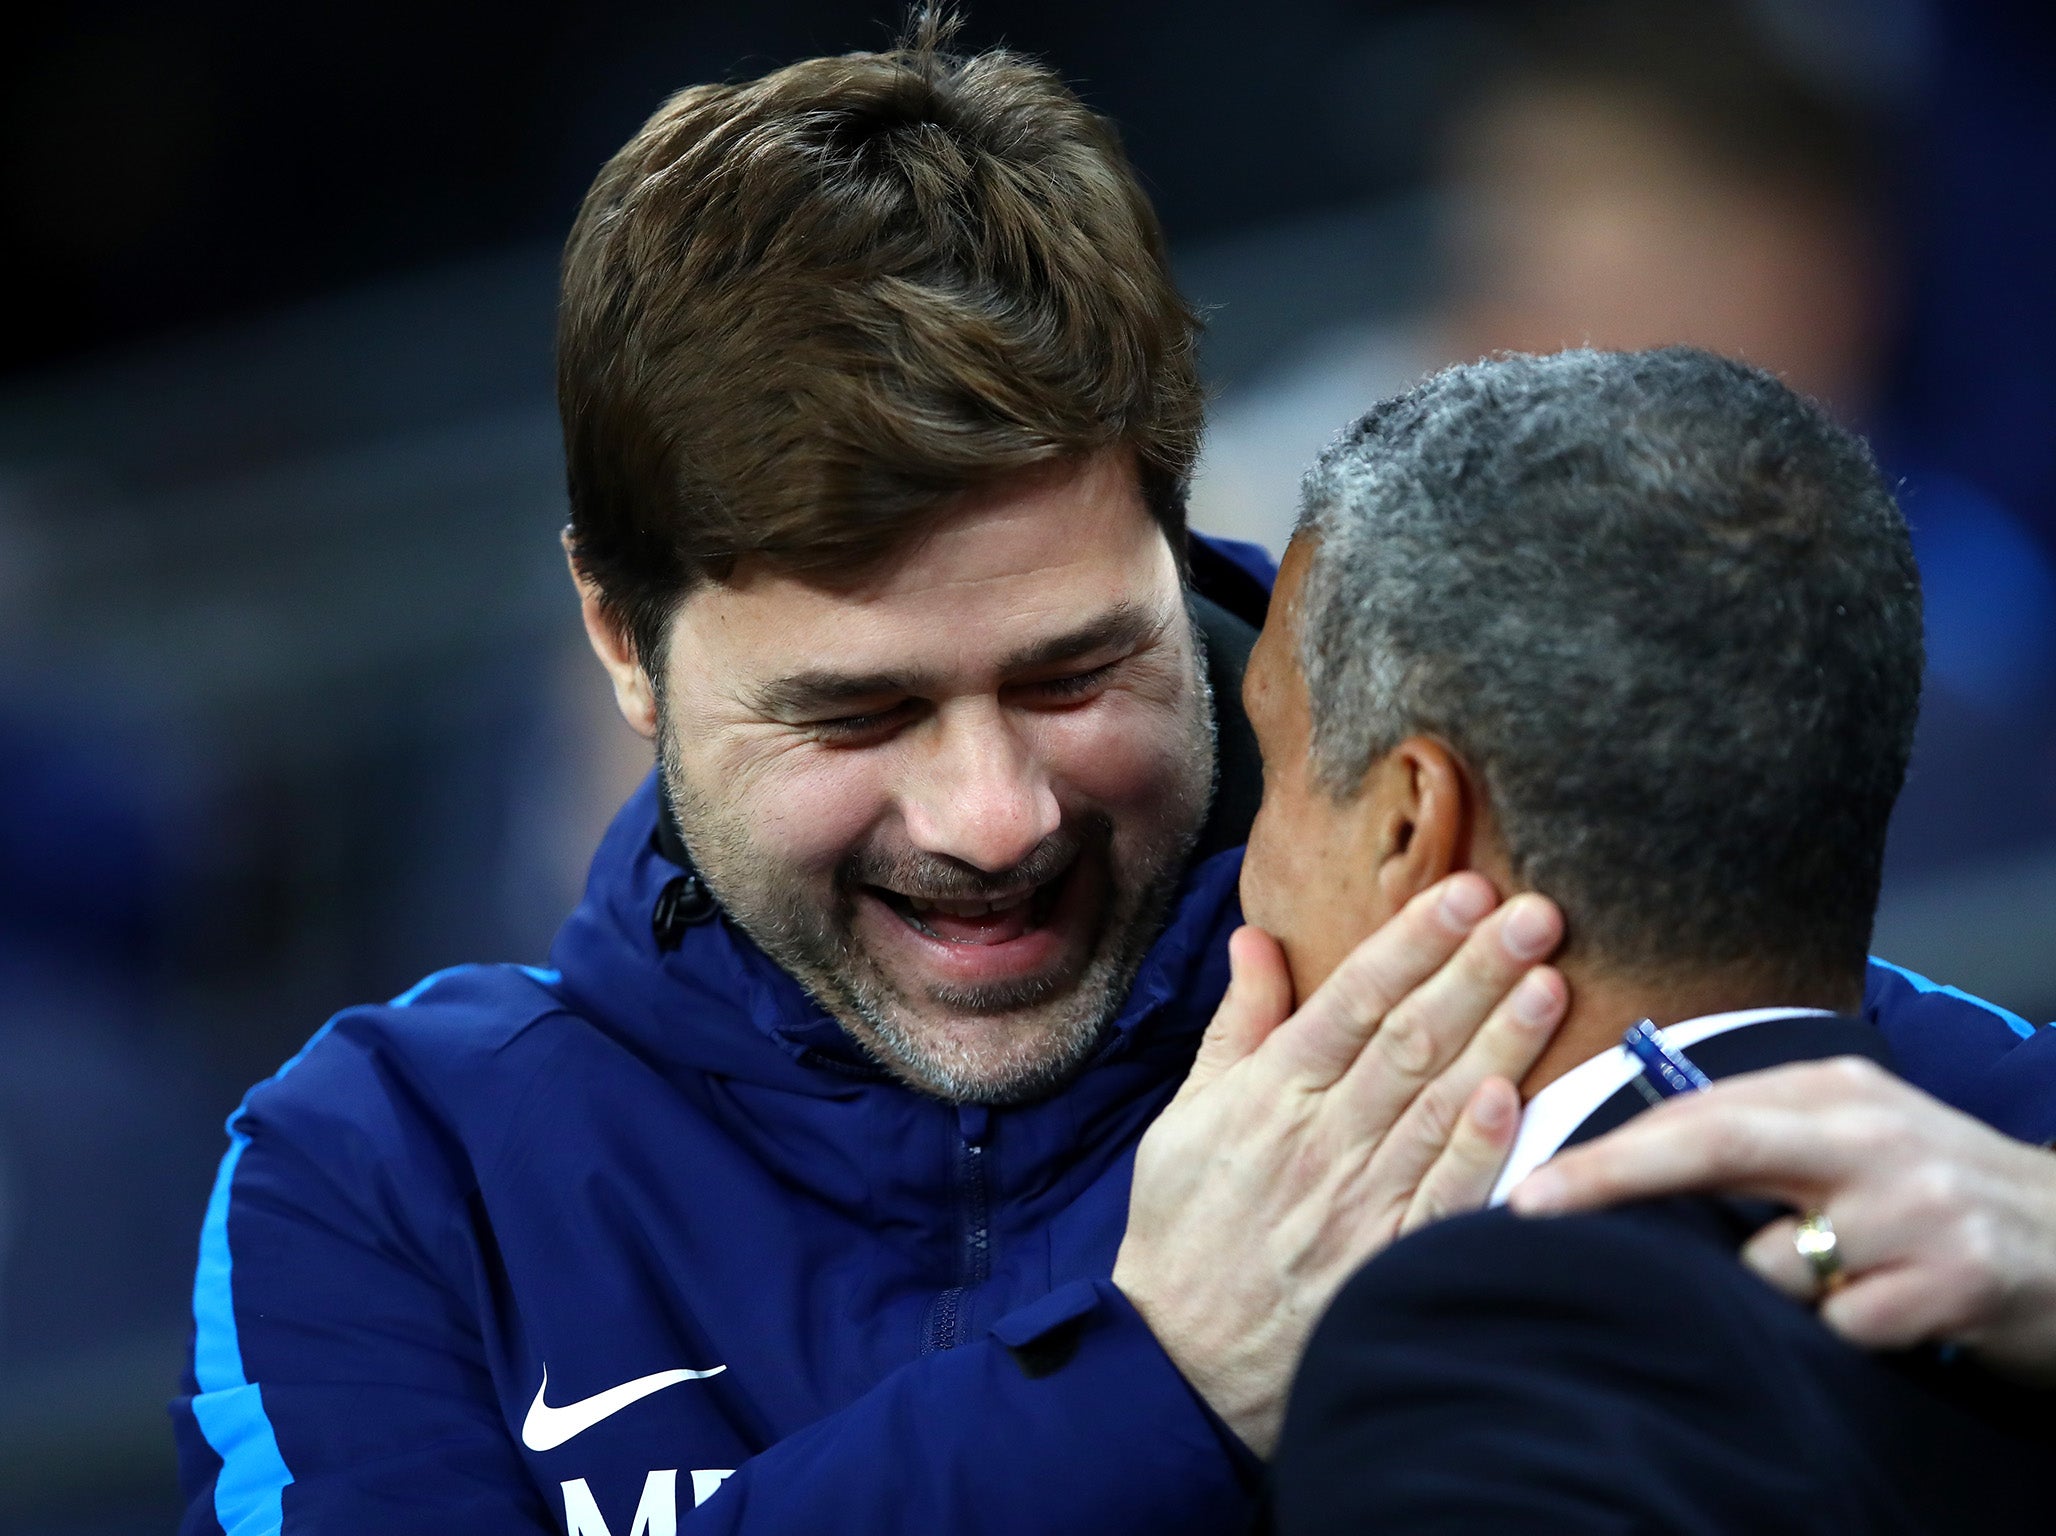 The Spurs manager cannot wait to take on City